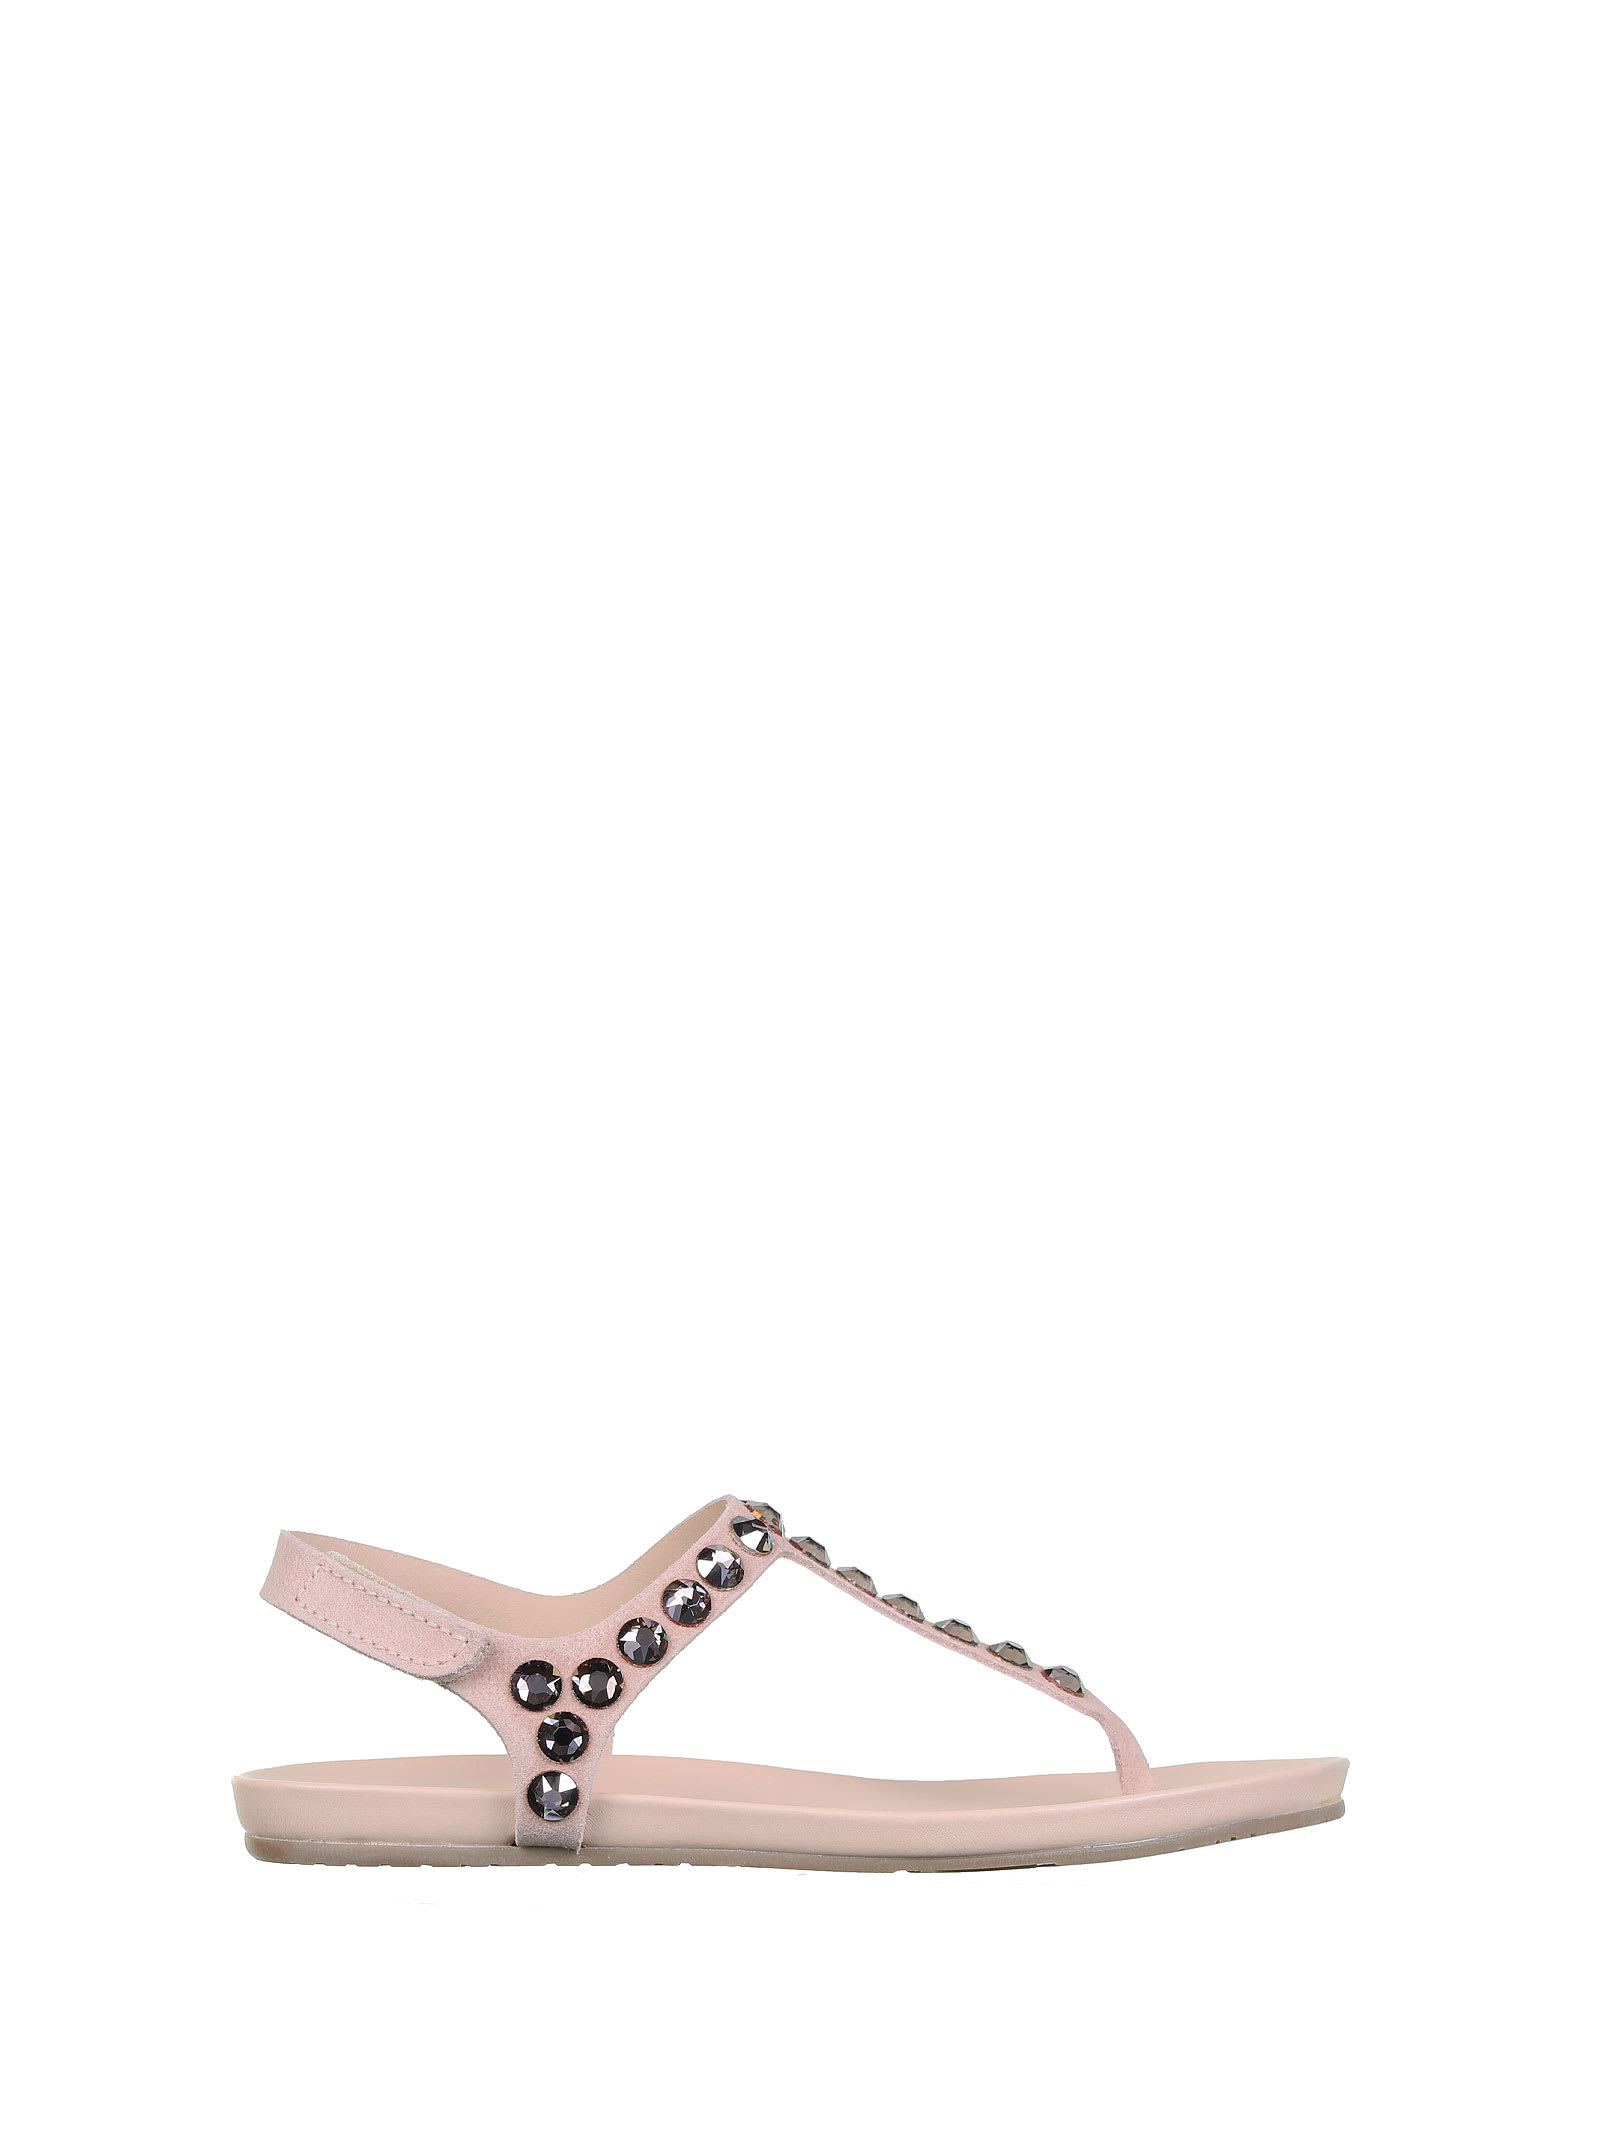 Pedro Garcia Thong Sandals With Rhinestones In Powder Leather